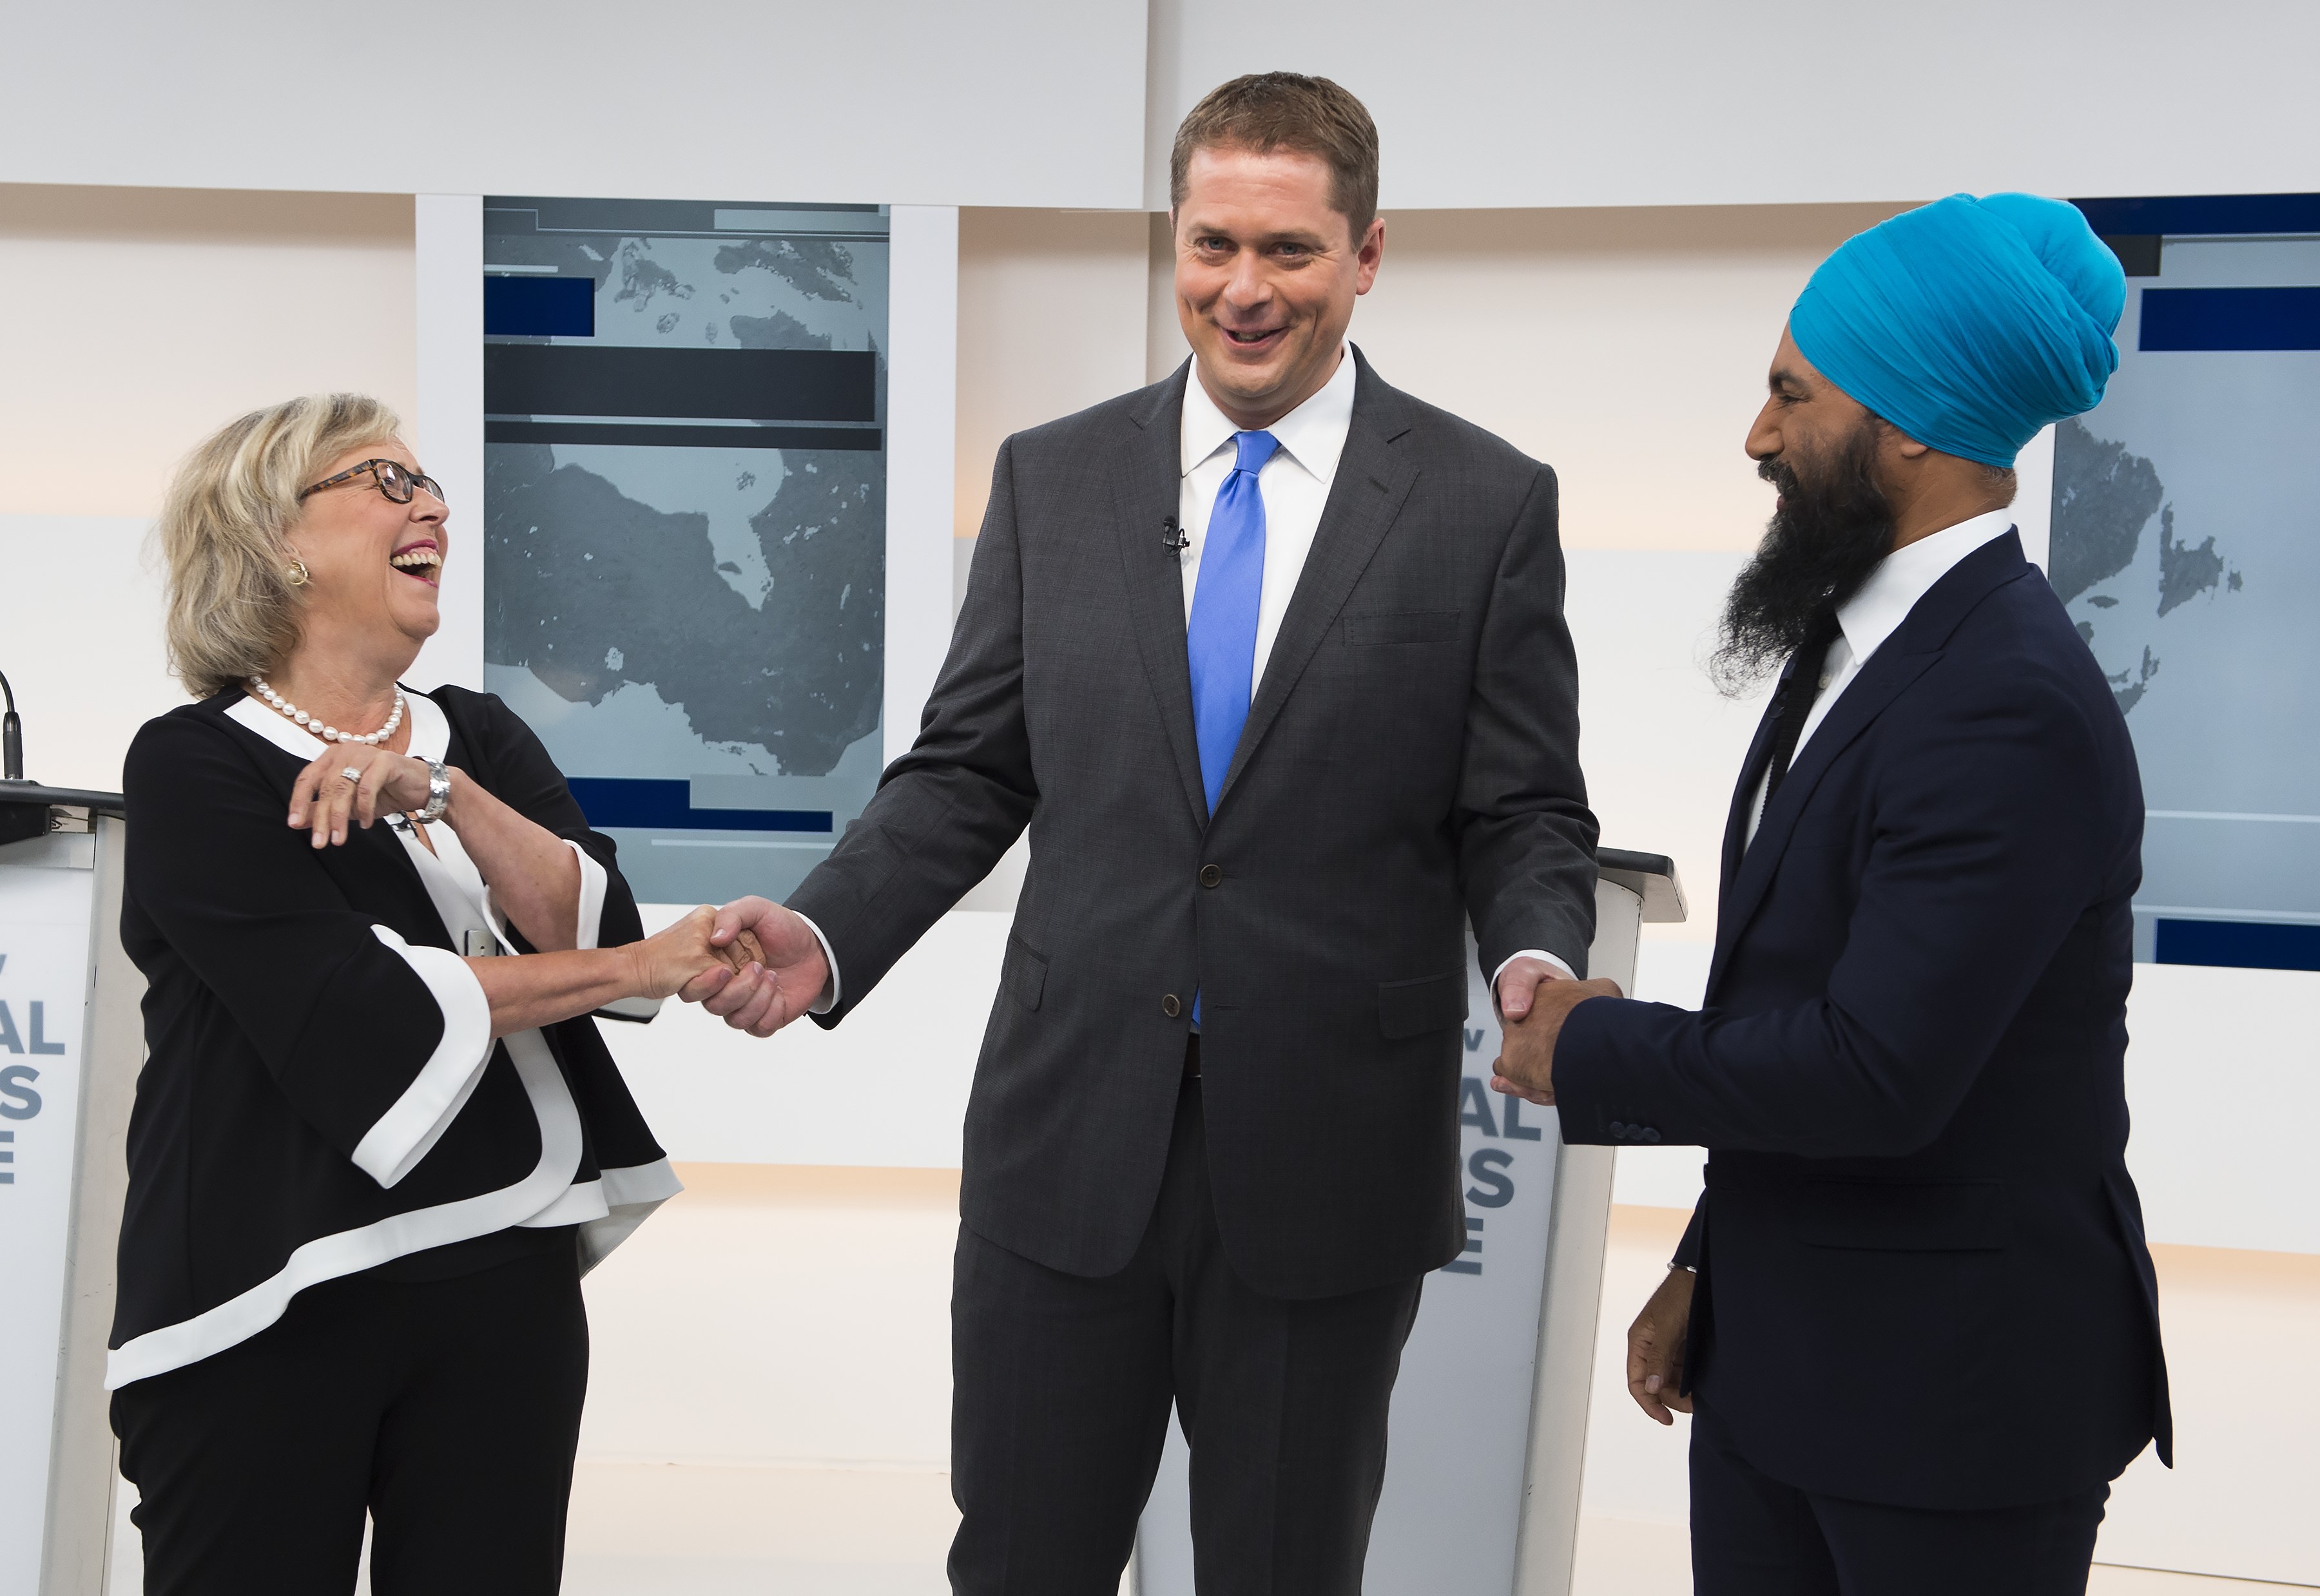 Green Party Leader Elizabeth May, left, Conservative Leader Andrew Scheer, centre, and NDP Leader Jagmeet Singh shake hands during the Maclean's/Citytv National Leaders Debate in Toronto on Thursday, Sept. 12, 2019. THE CANADIAN PRESS/Frank Gunn